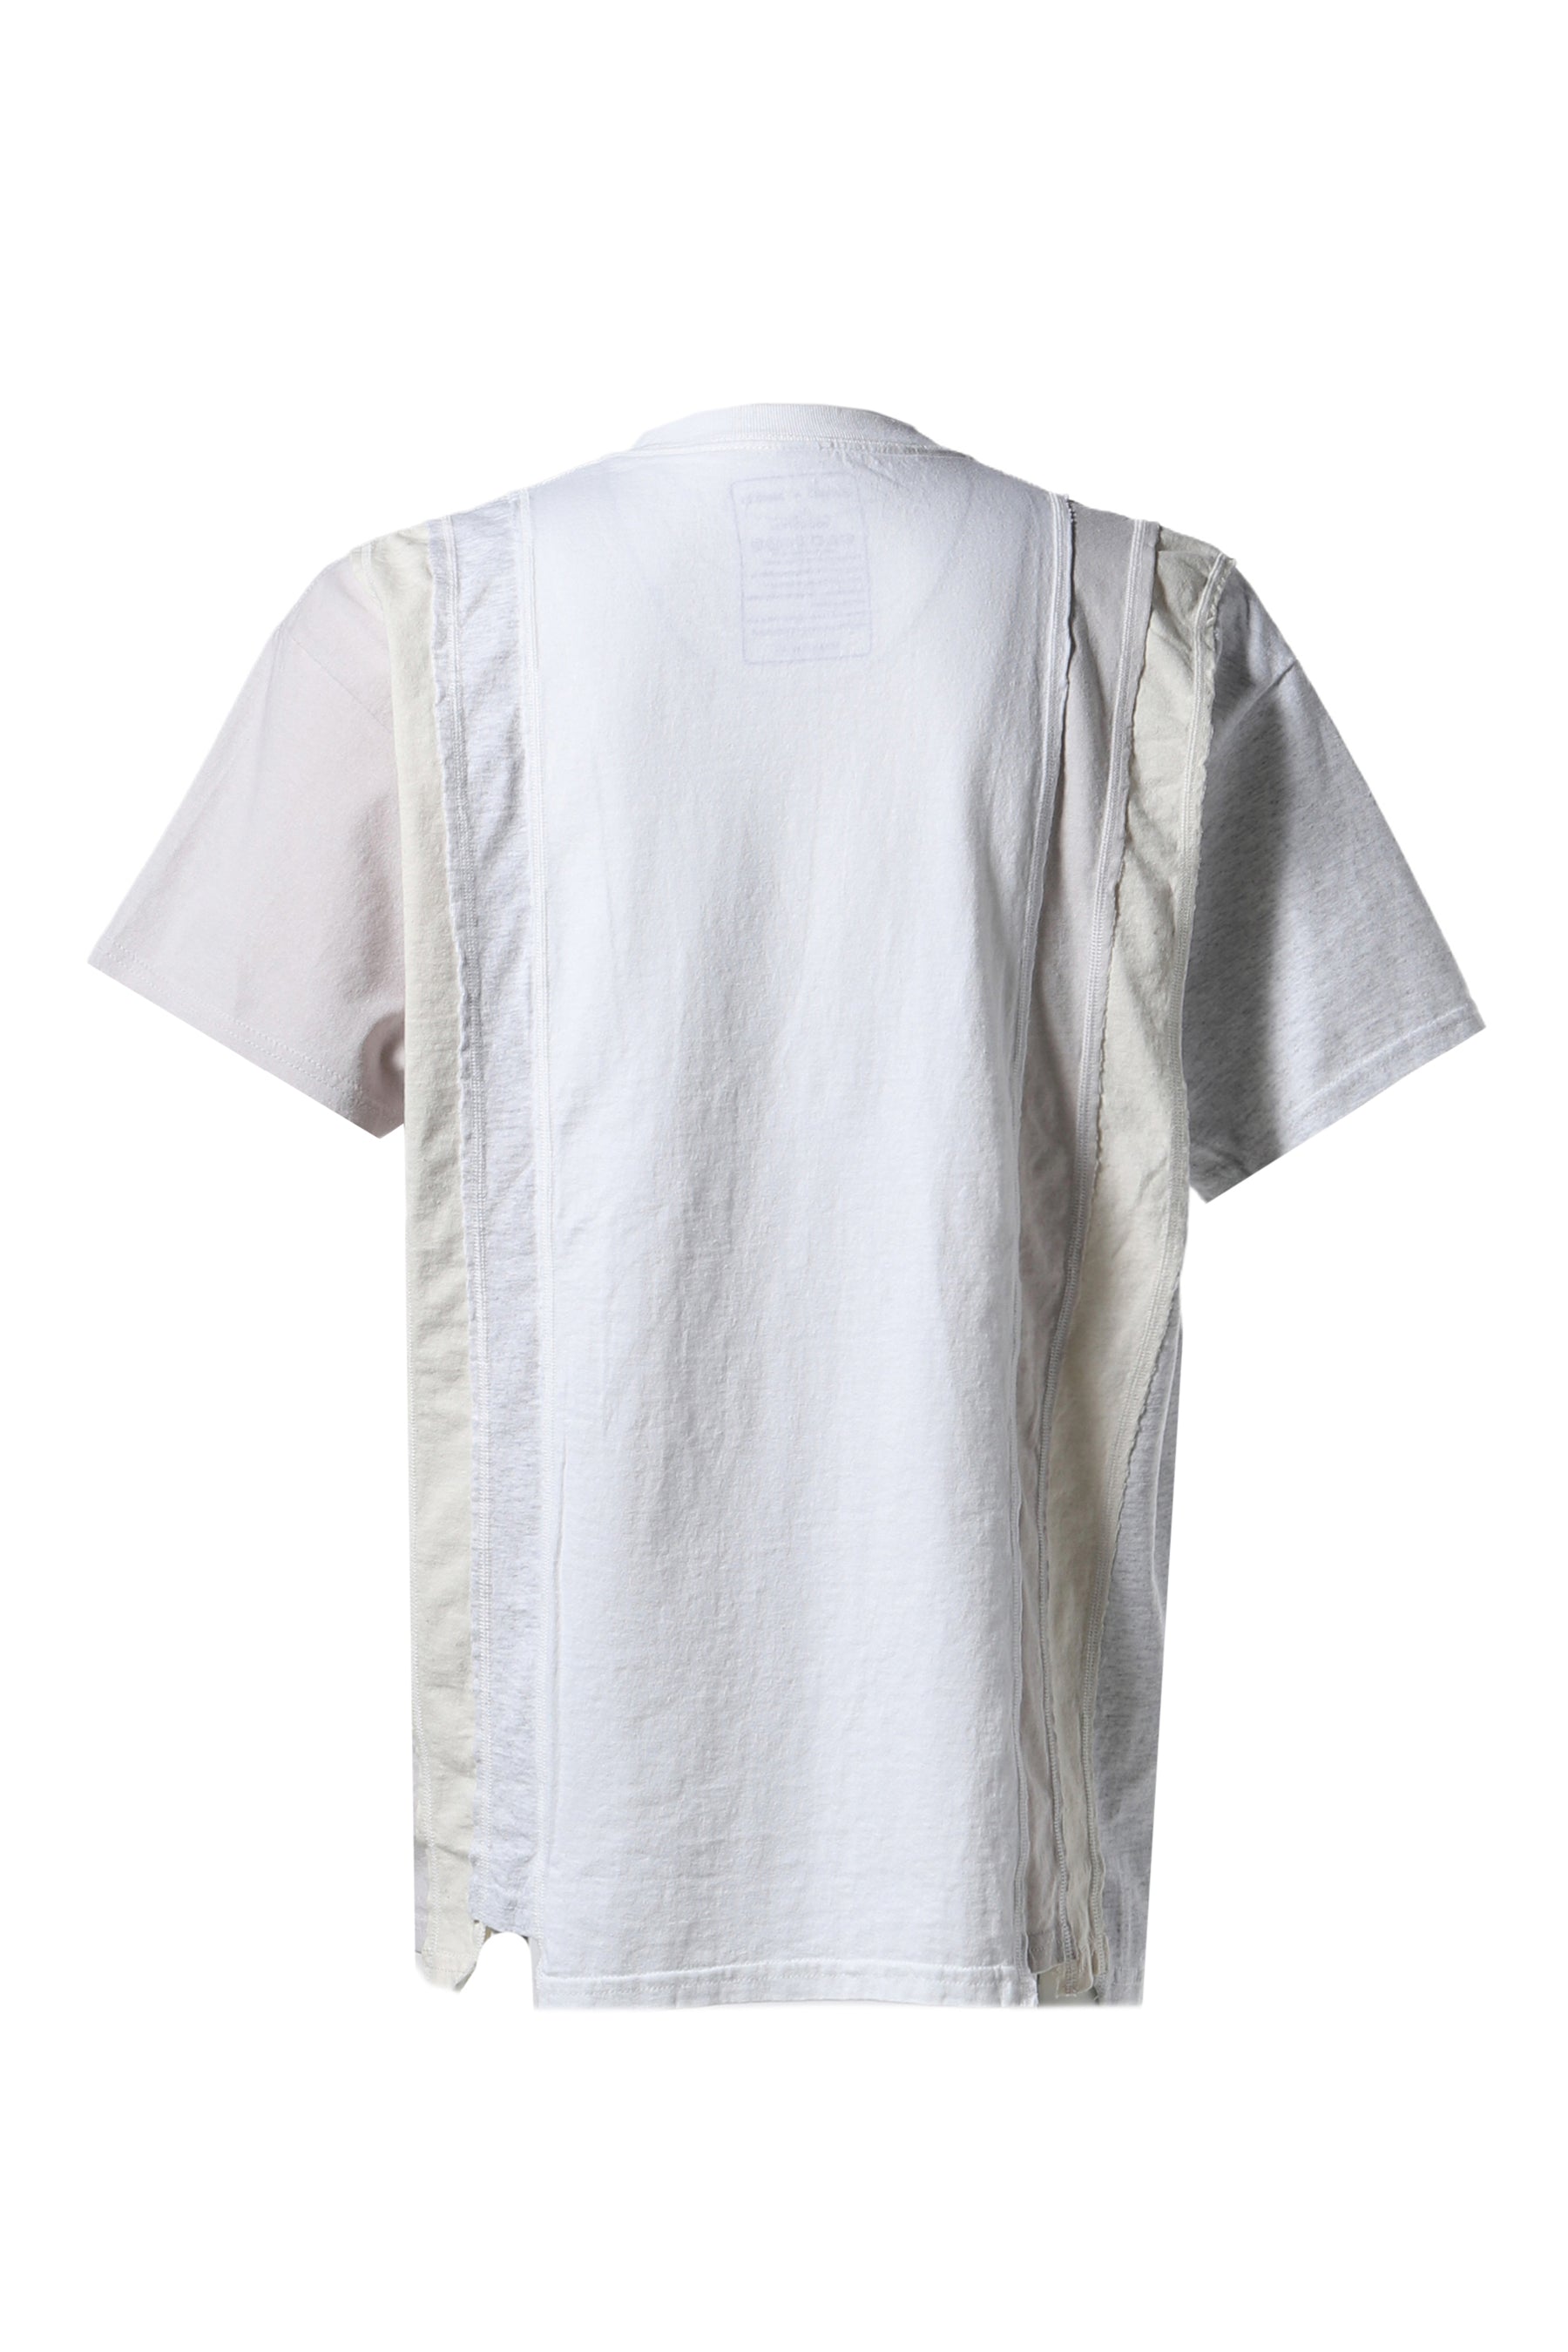 7 CUTS S/S TEE - SOLID / FADE / IVORY